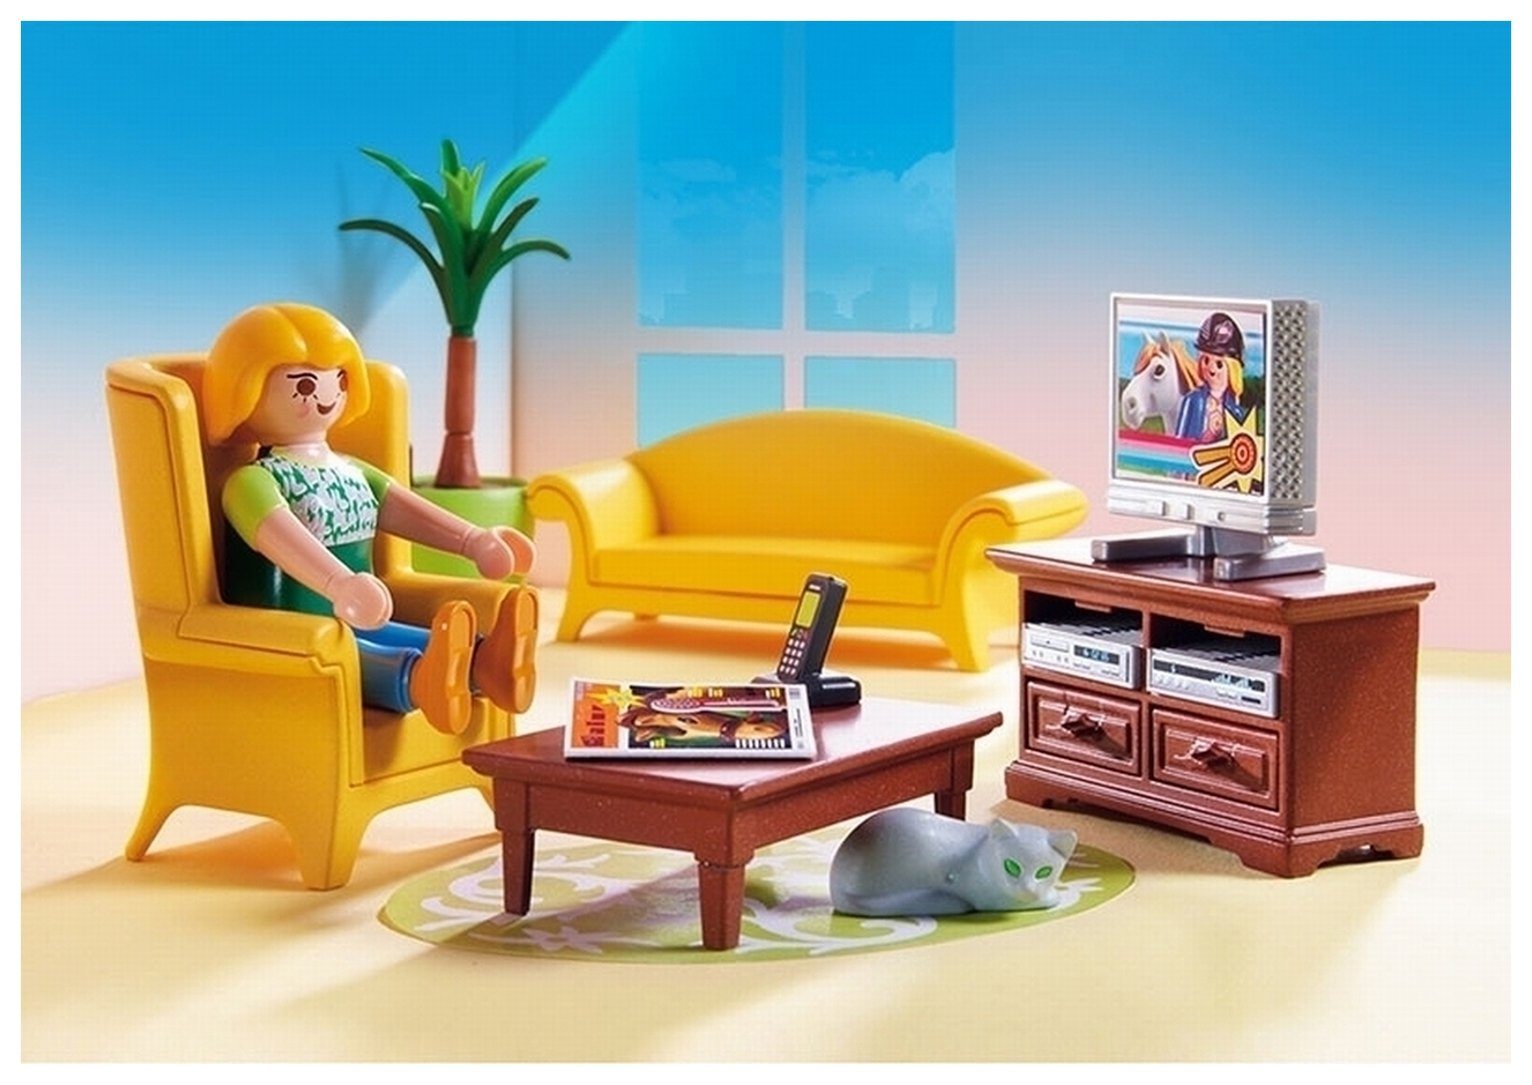 Playmobil 5308 Dollhouse Living Room With Fireplace